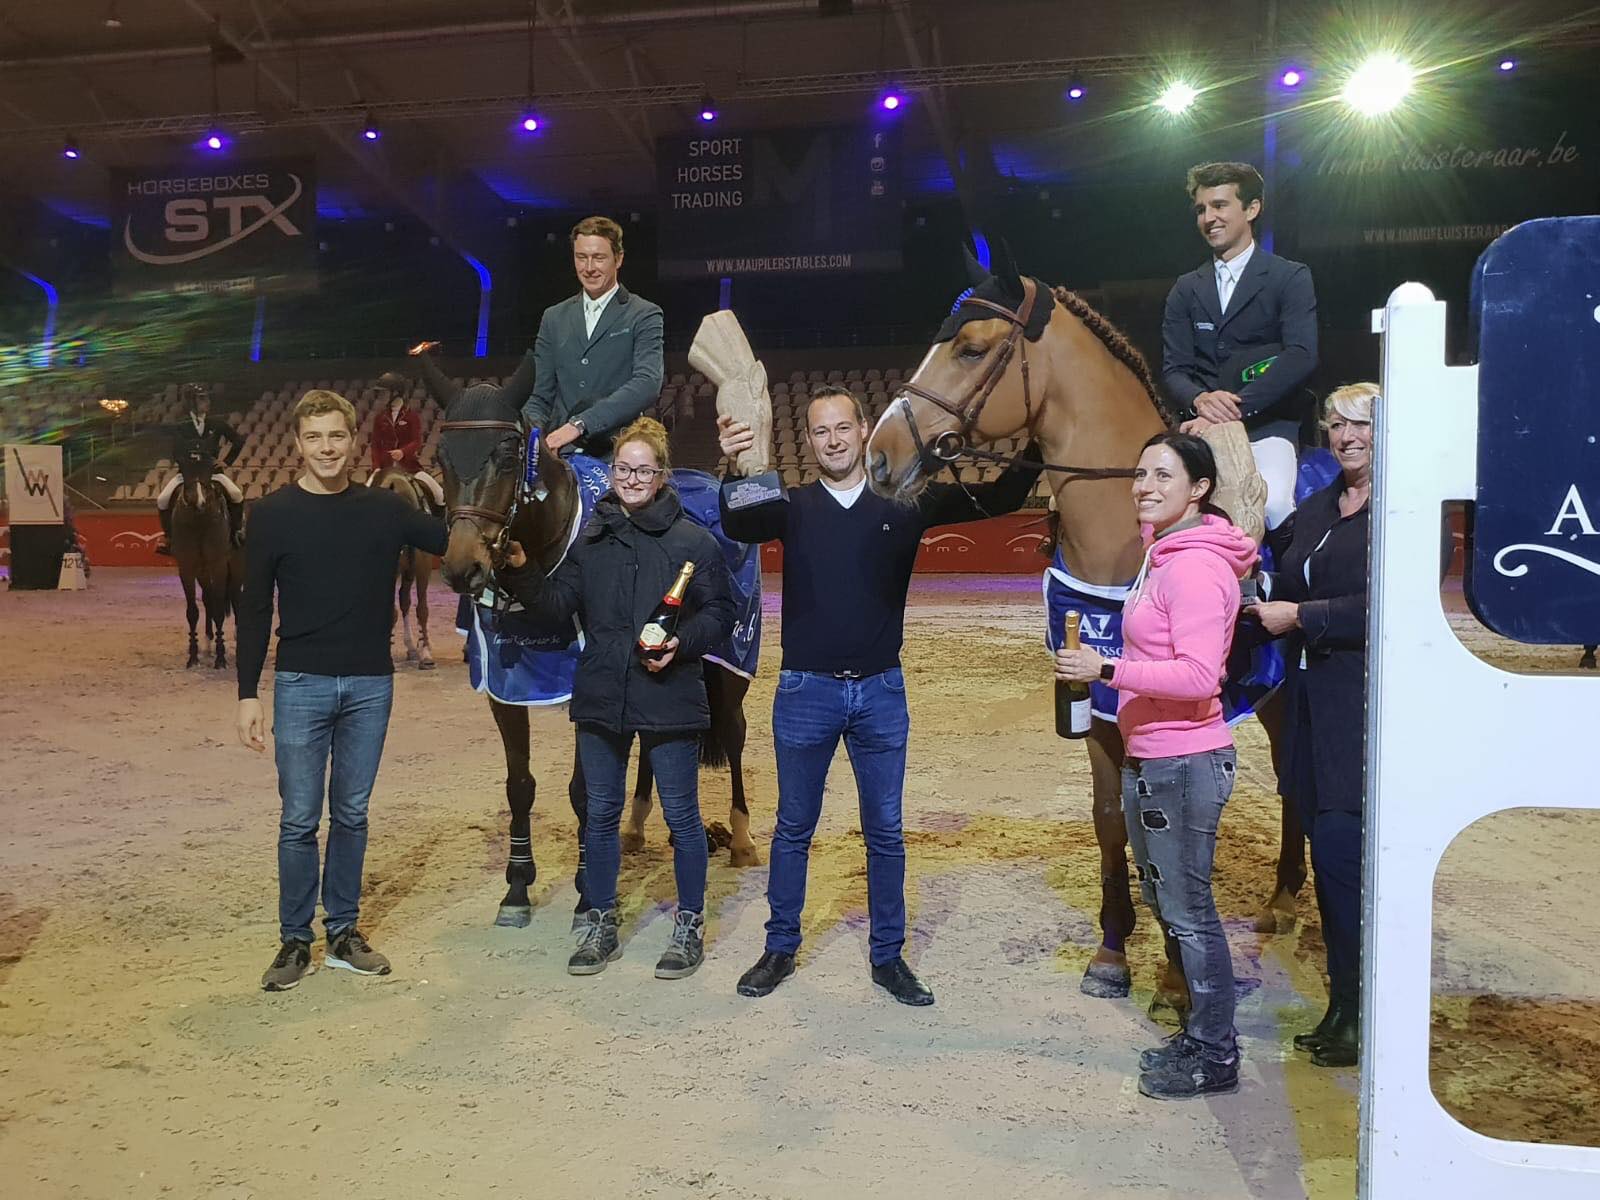 Shared victory for Pieter Clemens and Marlon Modolo Zanotelli in Grand Prix Sentower Park